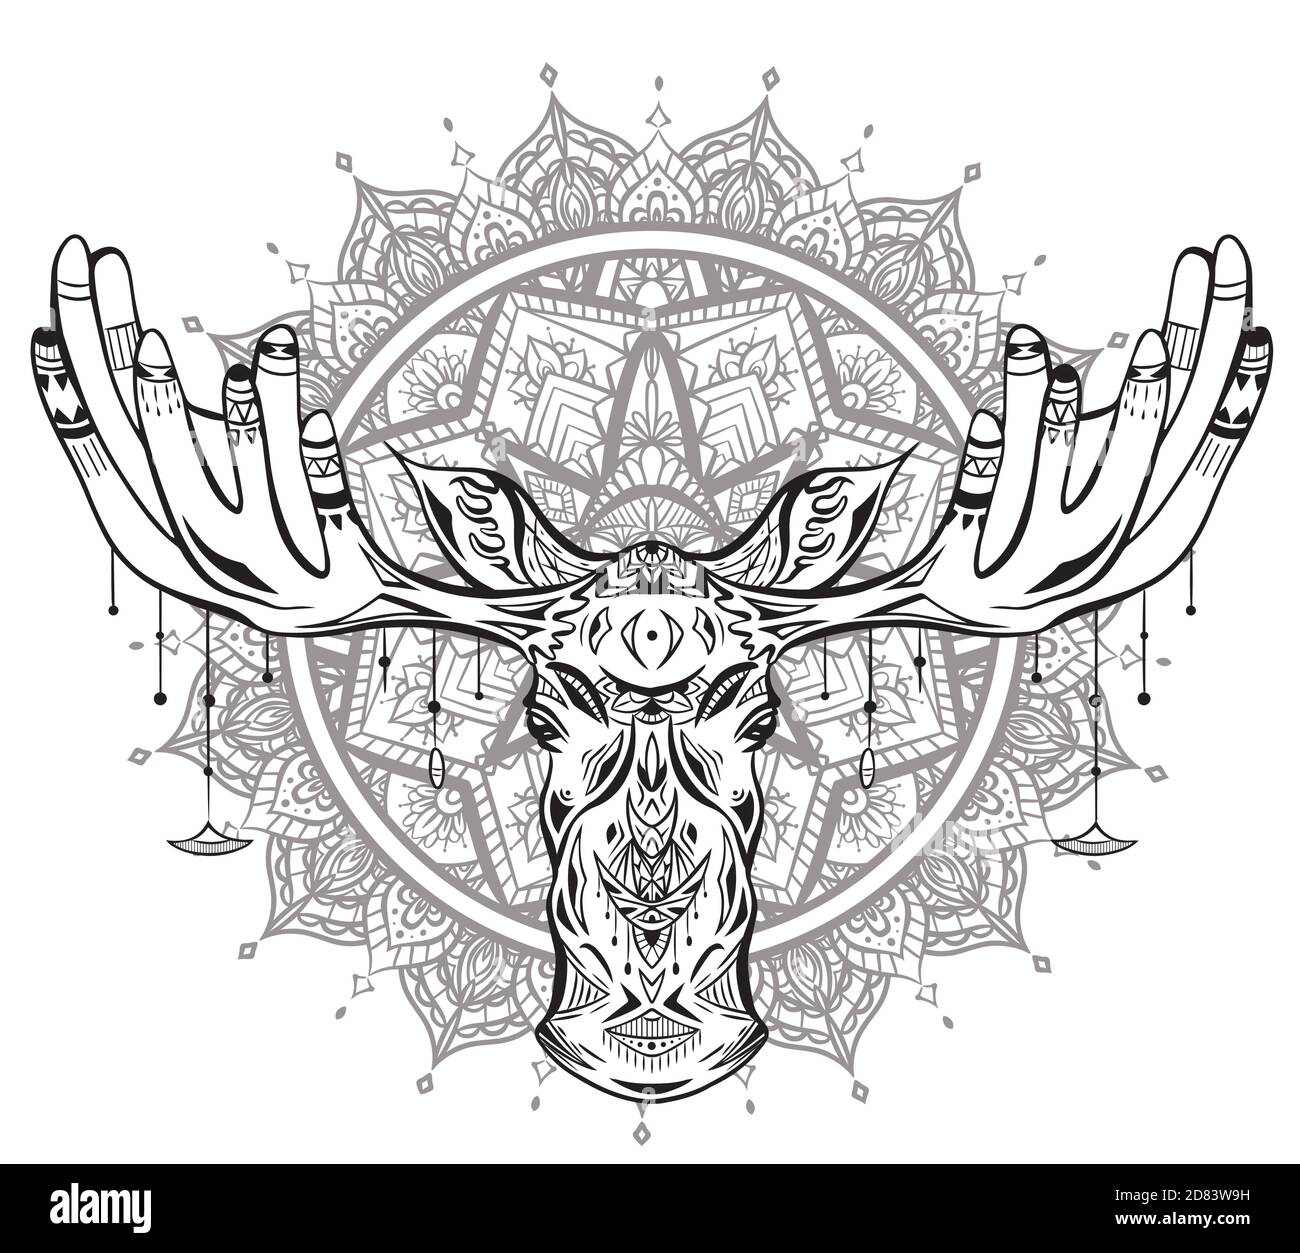 Contour native illustration of a moose head with ethnic decoration and bead on horns on mandala background. Boho vector illustration for card, t-shirt Stock Vector